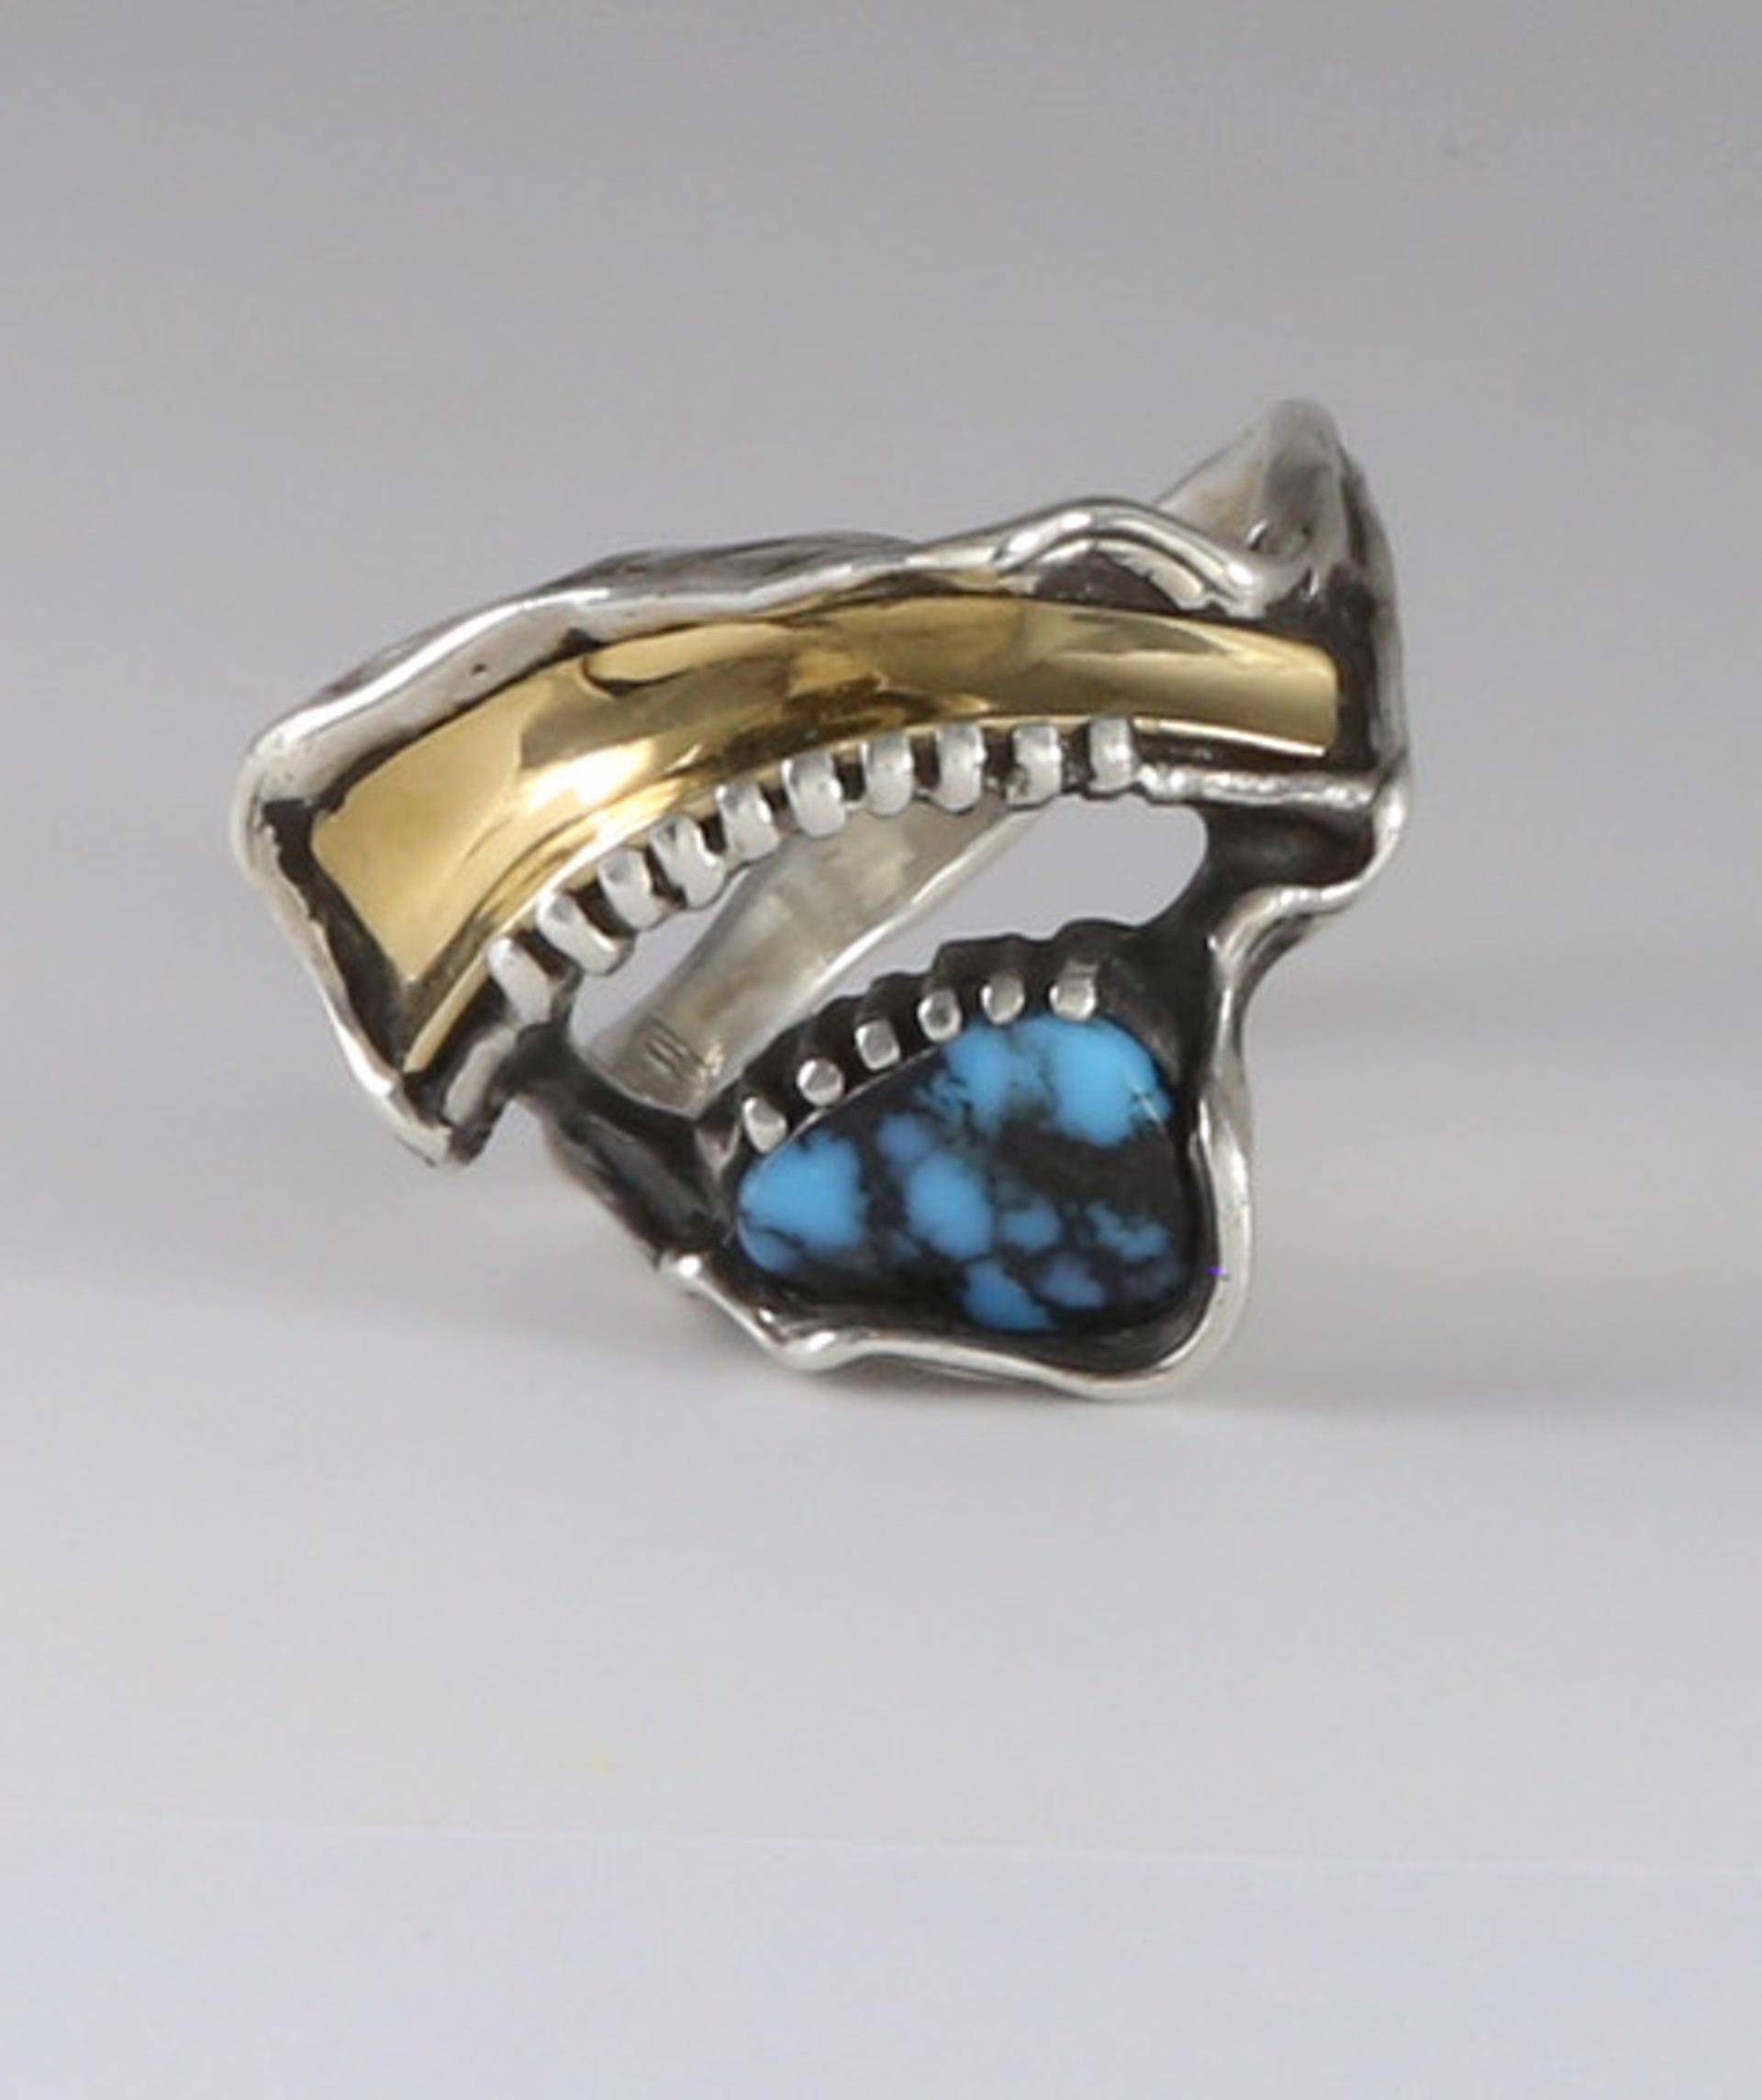 Ring - Burnham Turquoise With Sterling Silver & 18K Flute - Size 6.5 - #251 by Ken and Barbara Newman